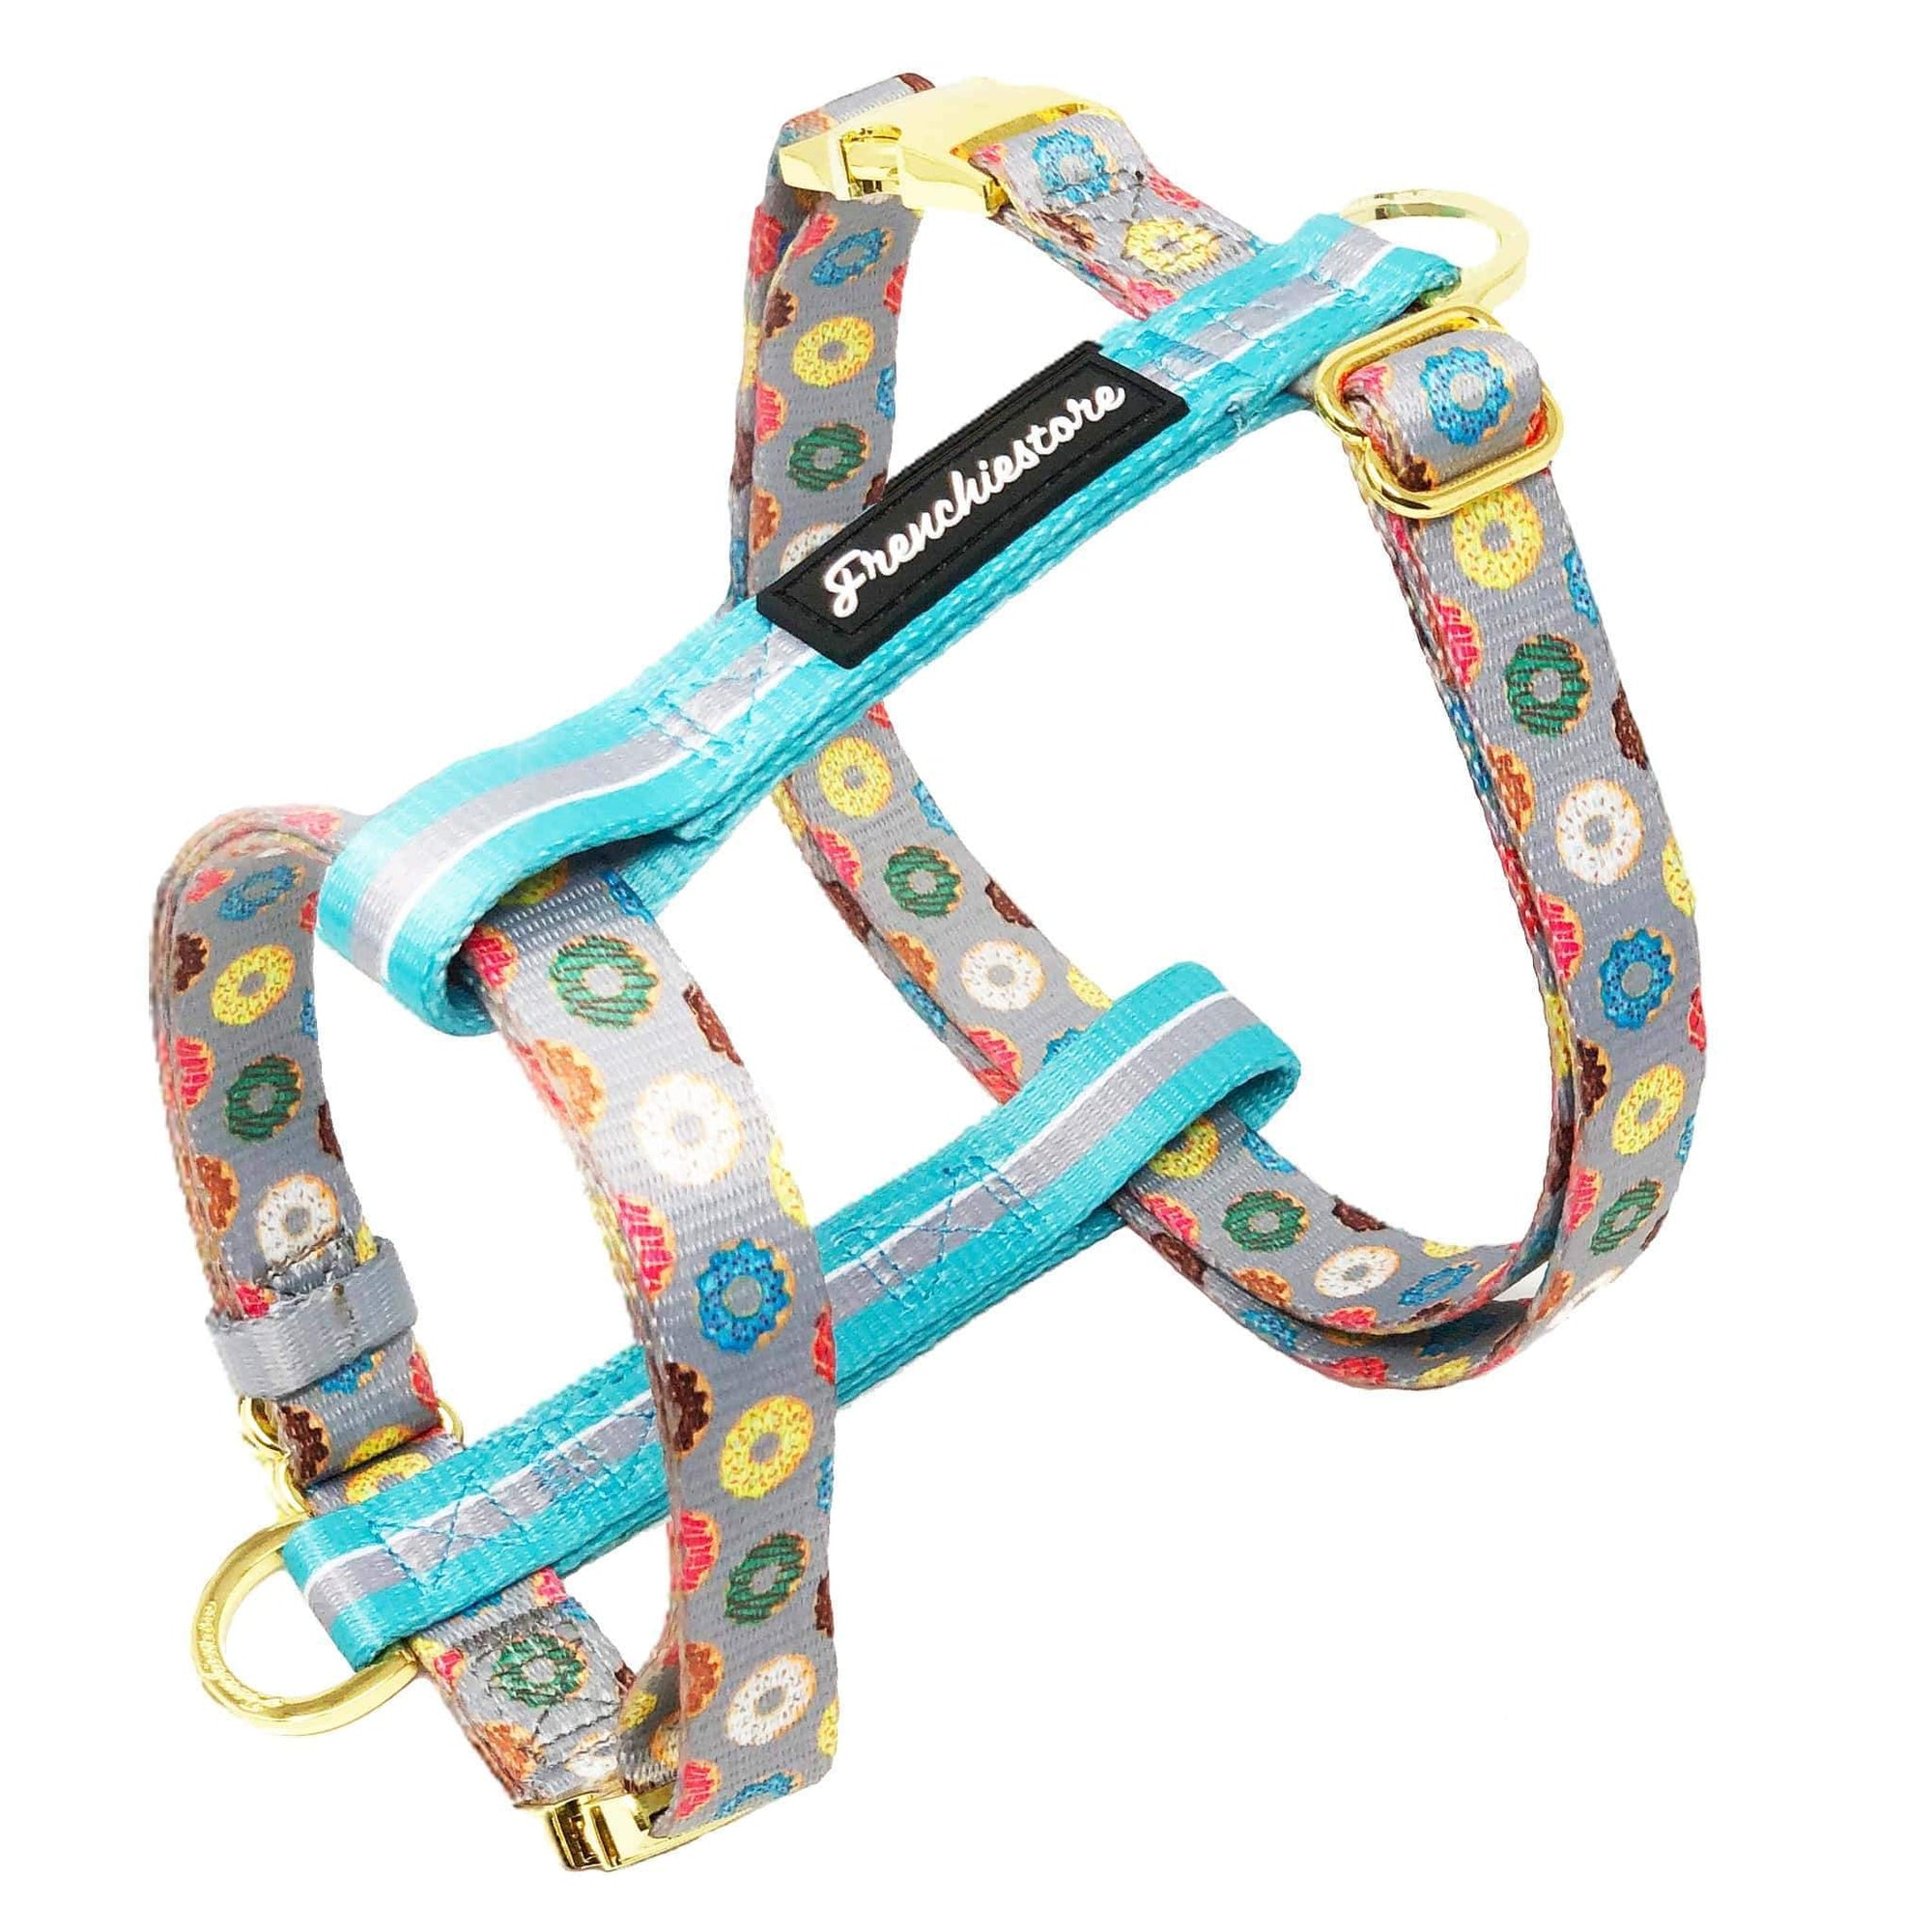 Frenchiestore Adjustable Pet Health Strap Harness | Mint StarPup, Frenchie Dog, French Bulldog pet products